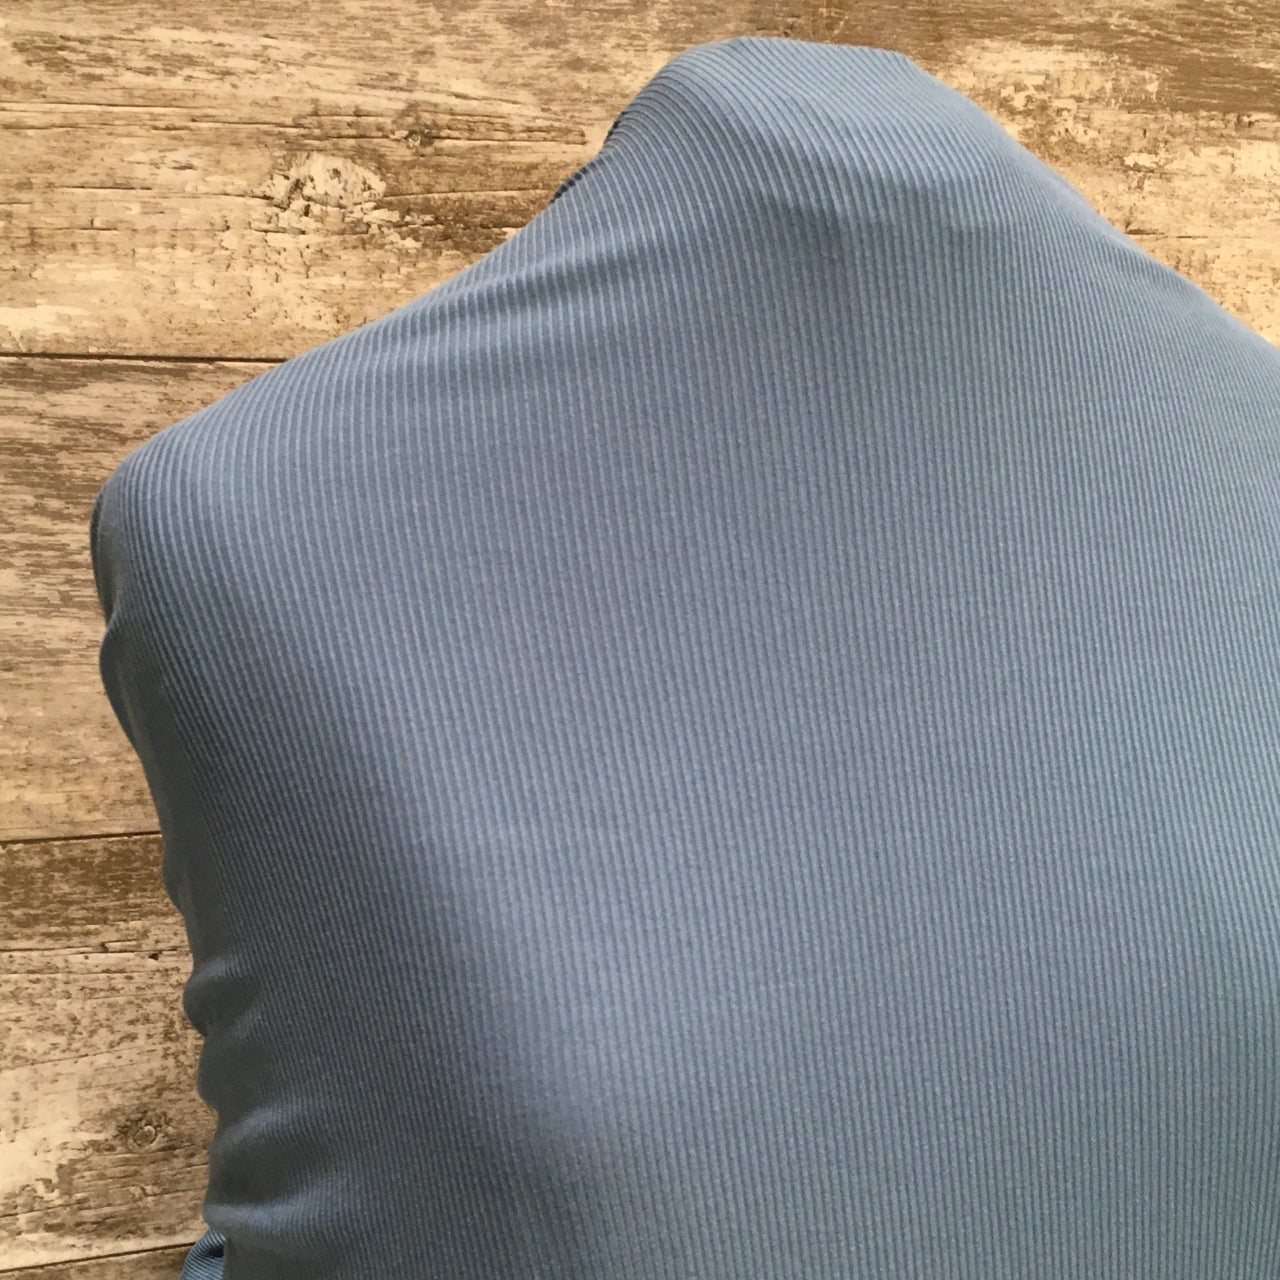 Ribbed DBP - Solid Blue - Sold by half yard